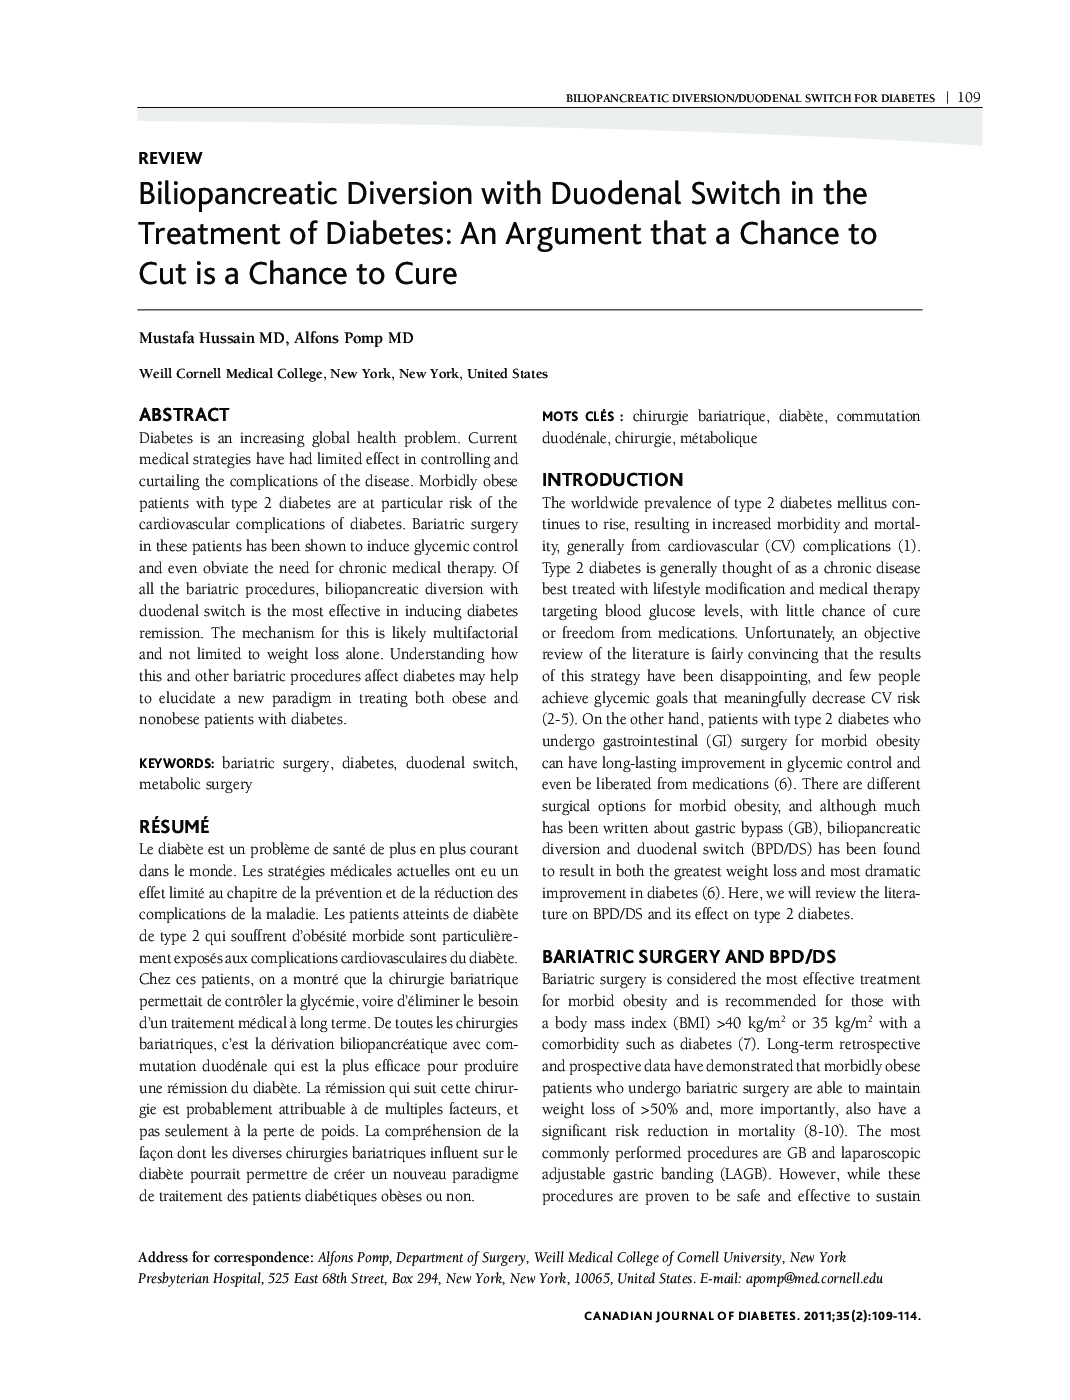 Biliopancreatic Diversion with Duodenal Switch in the Treatment of Diabetes: An Argument that a Chance to Cut is a Chance to Cure